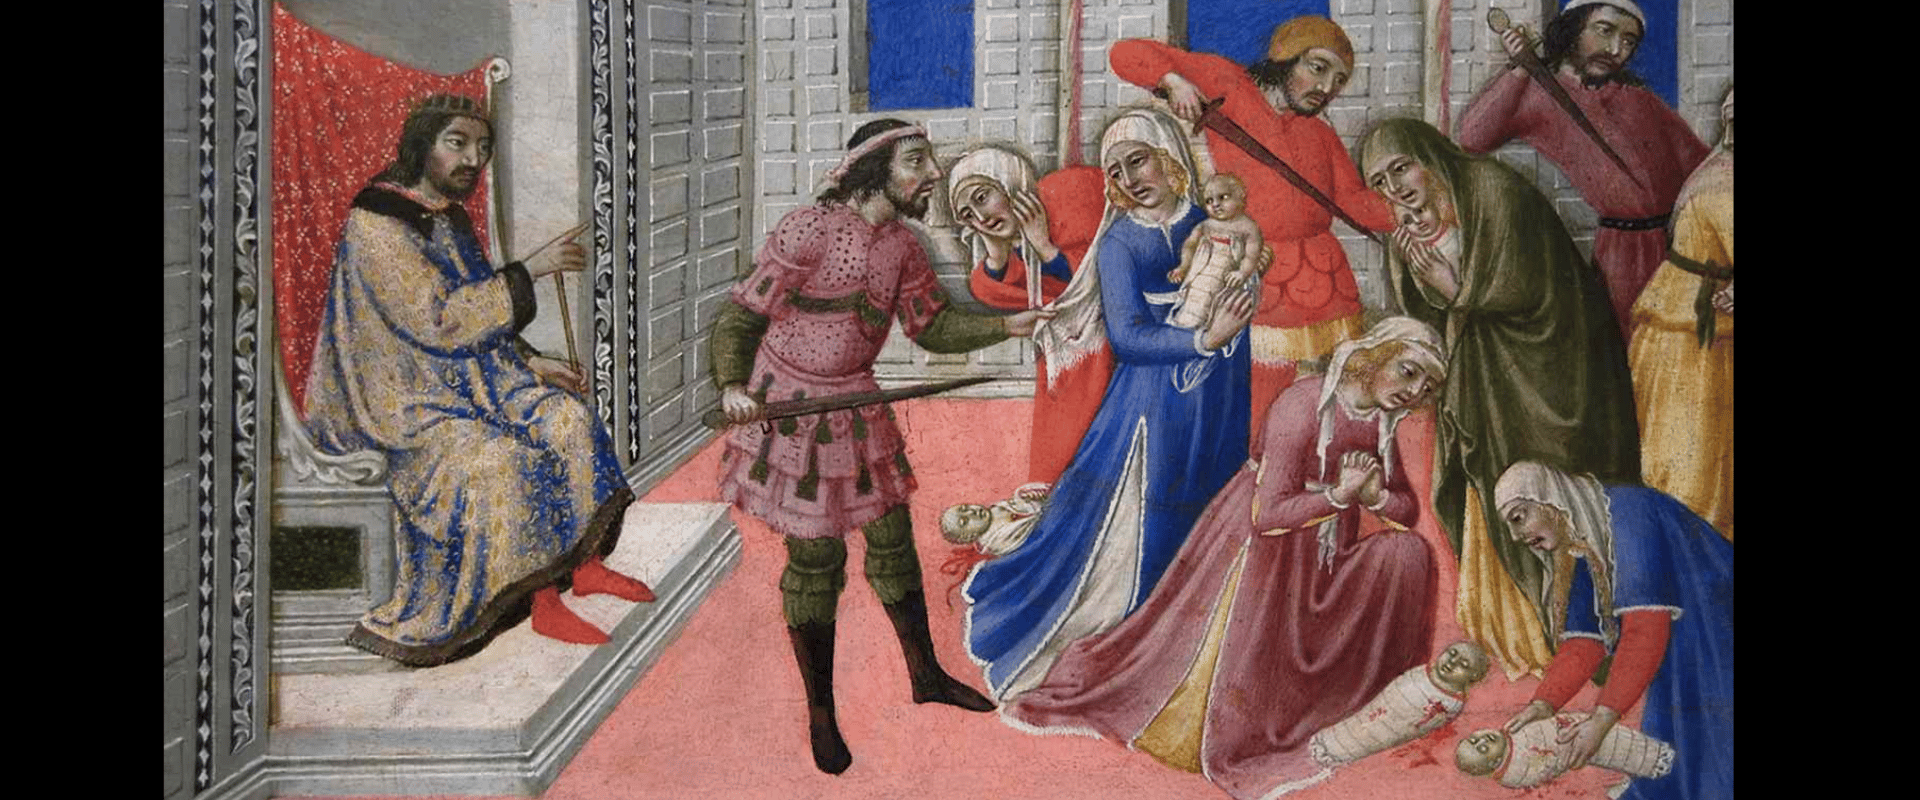 Herod Slaughter of the Innocents